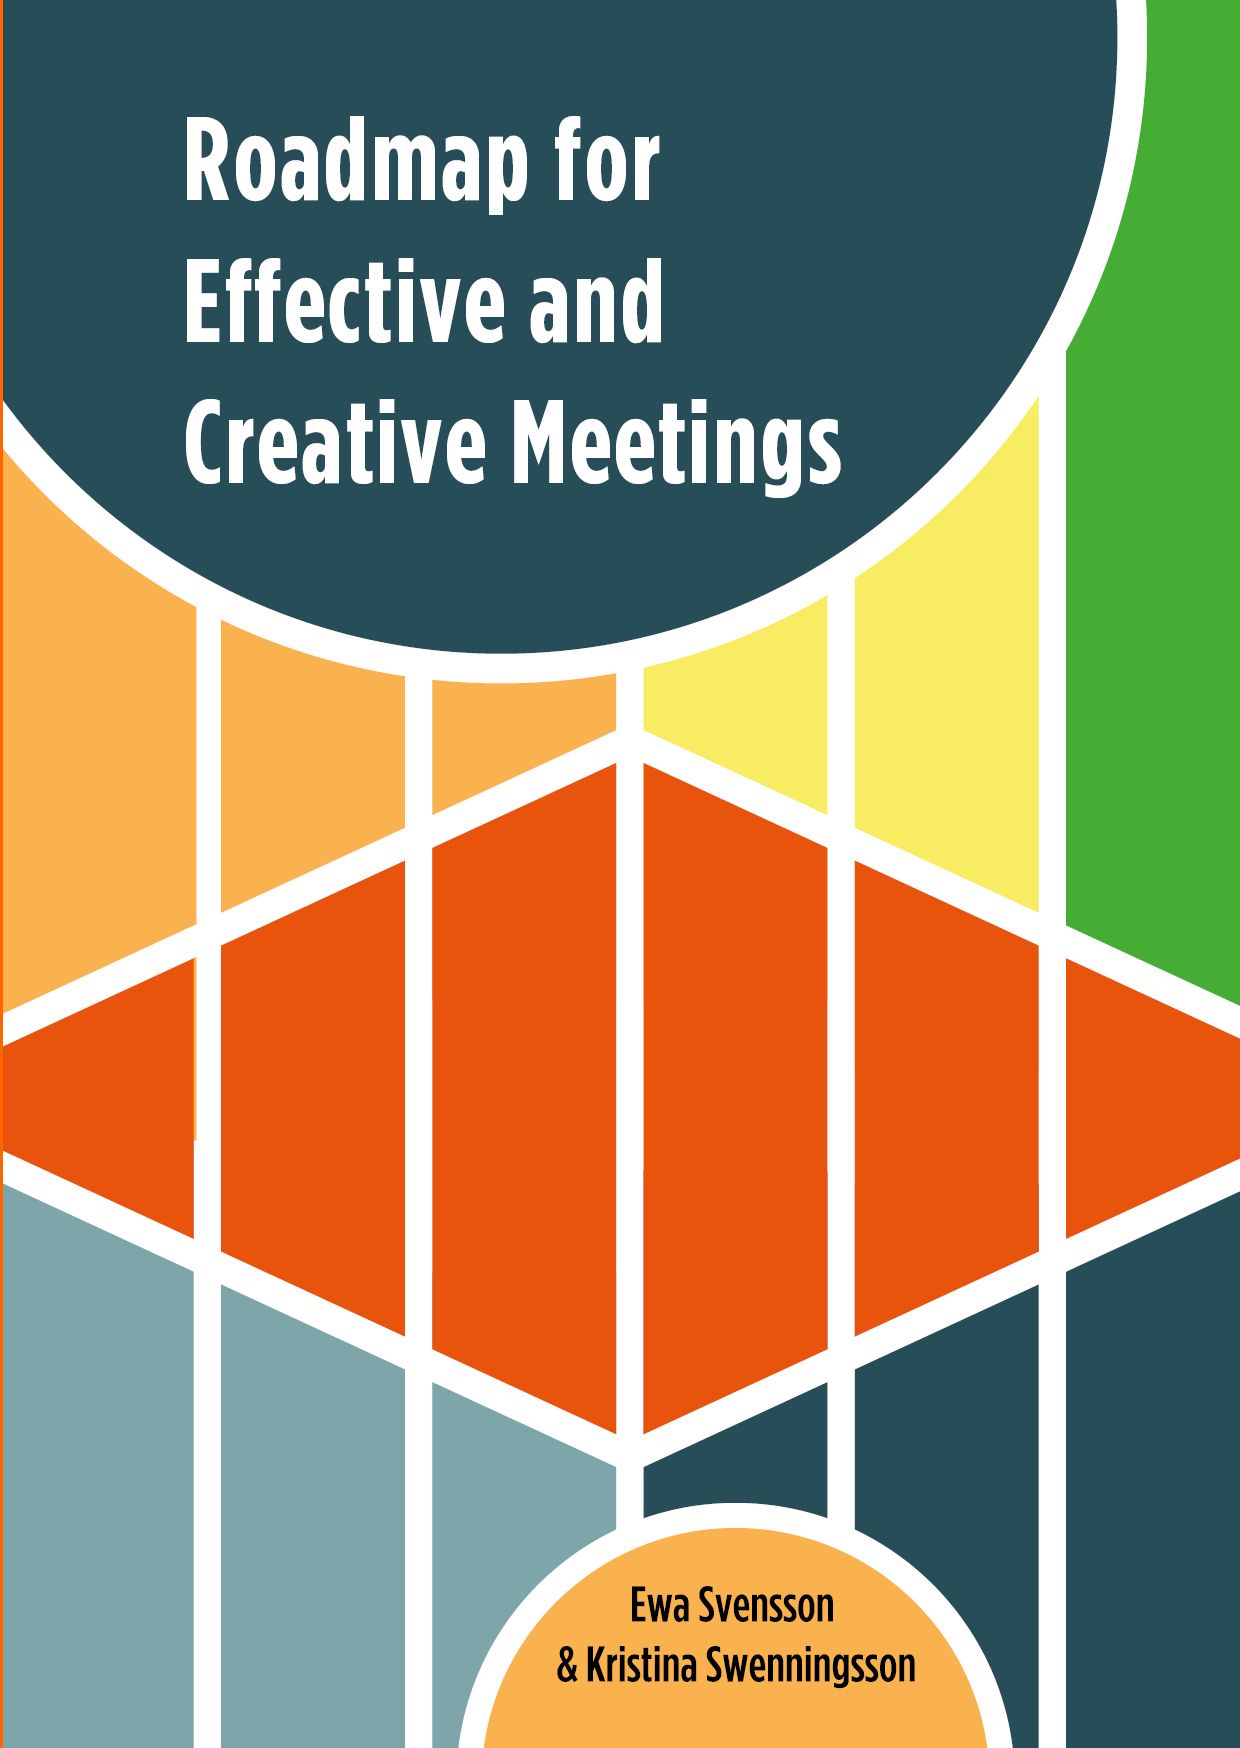 Roadmap for Effective and Creative Meetings, eBook by Kristina Swenningsson, Ewa Svensson